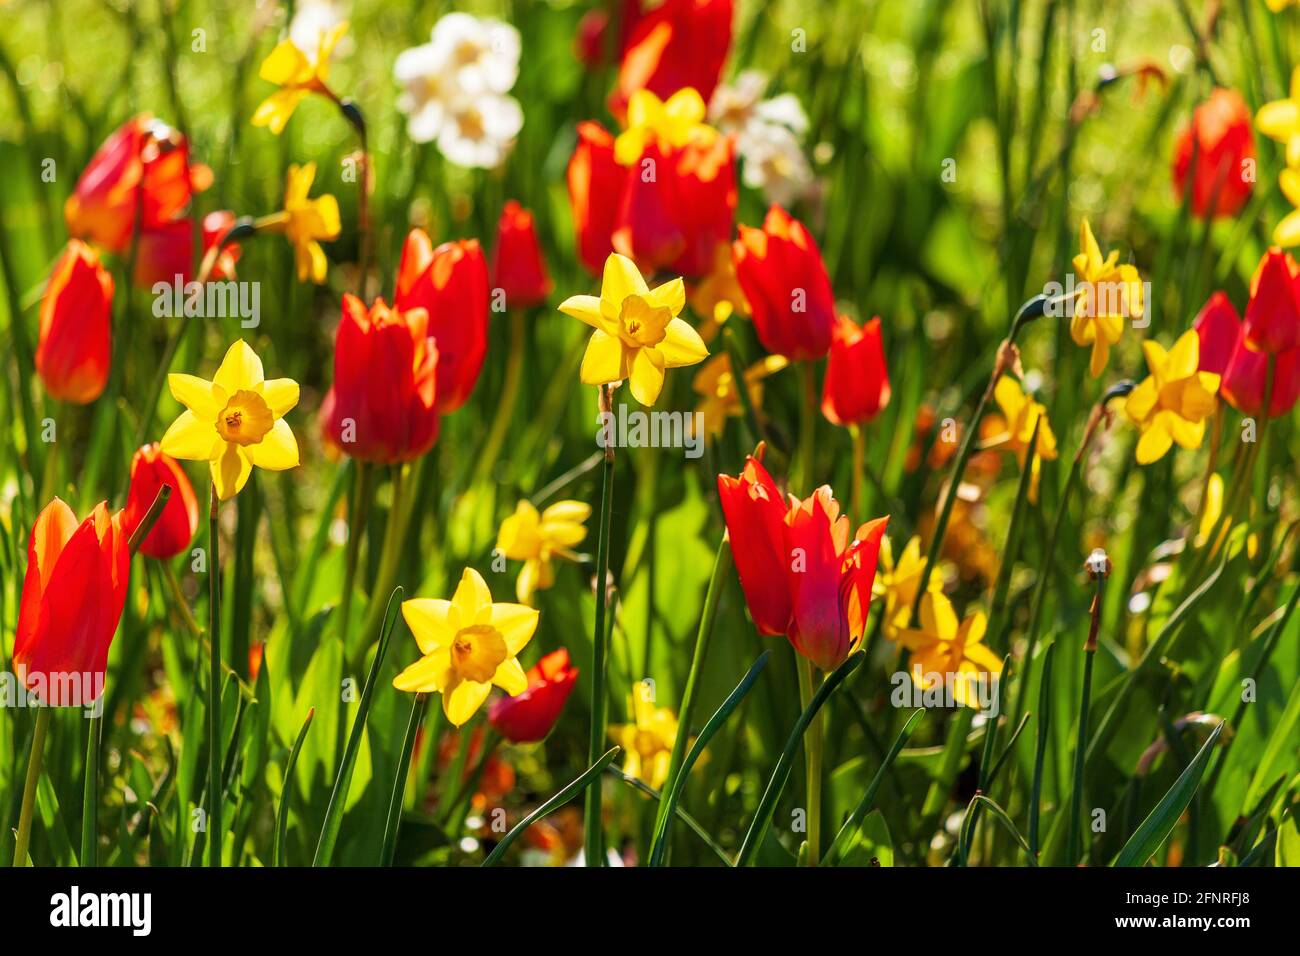 Beautiful blooming flower bed with yellow daffodils and red tulips on a sunny springtime day Stock Photo